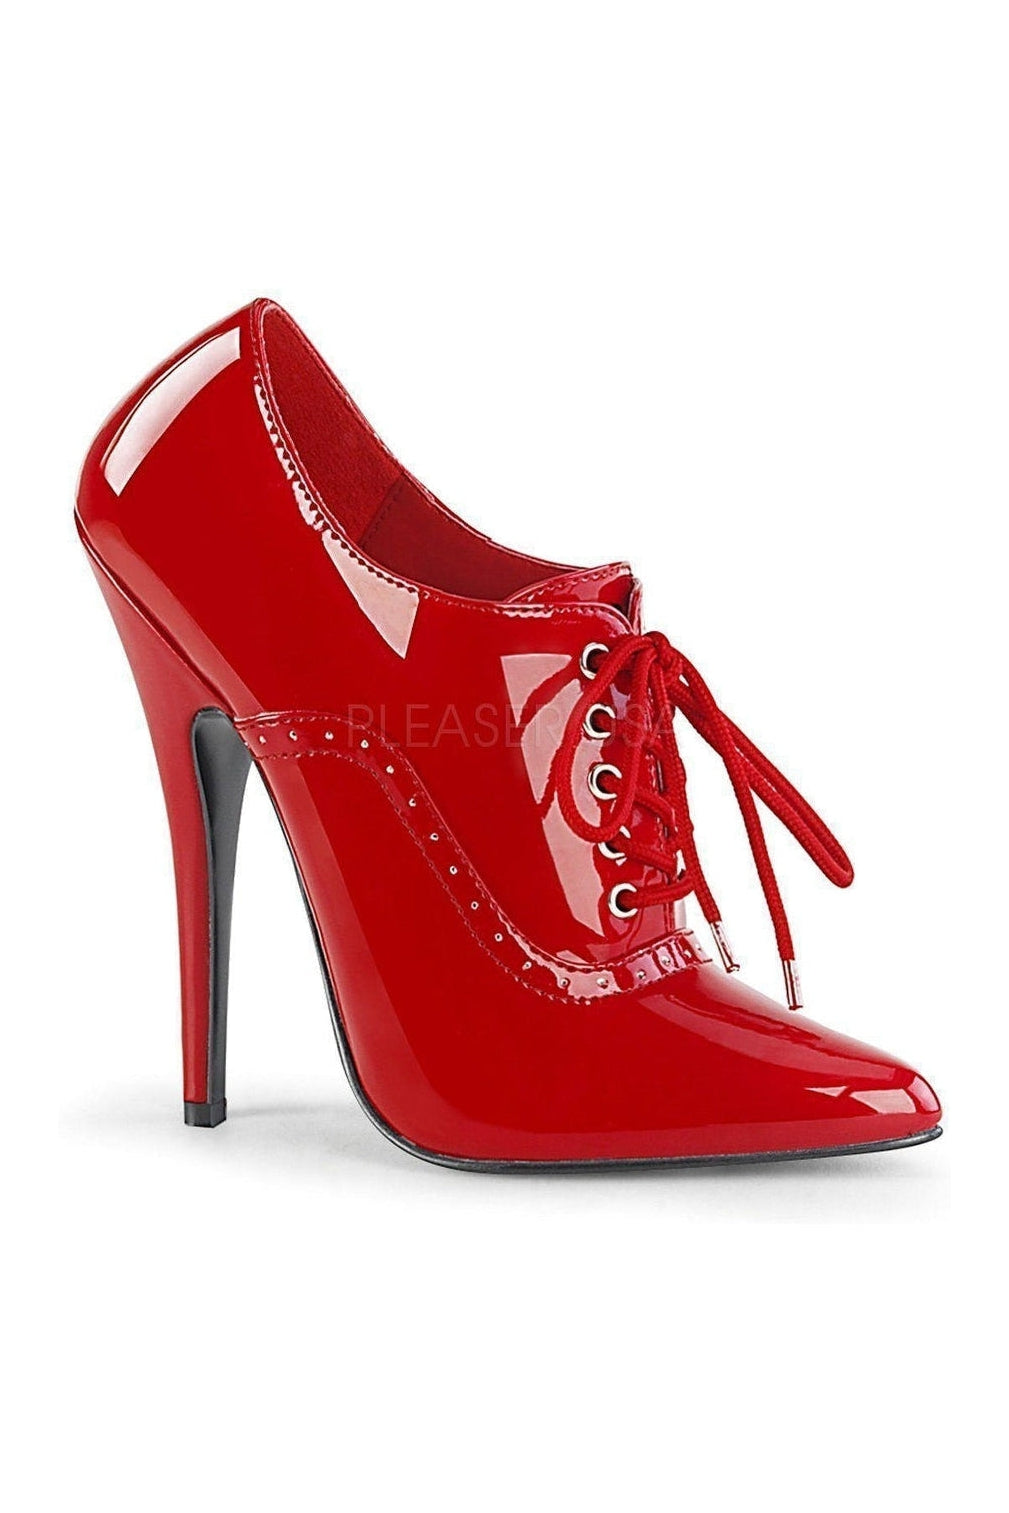 DOMINA-460 Ankle Bootie | Red Patent-Ankle Boots- Stripper Shoes at SEXYSHOES.COM